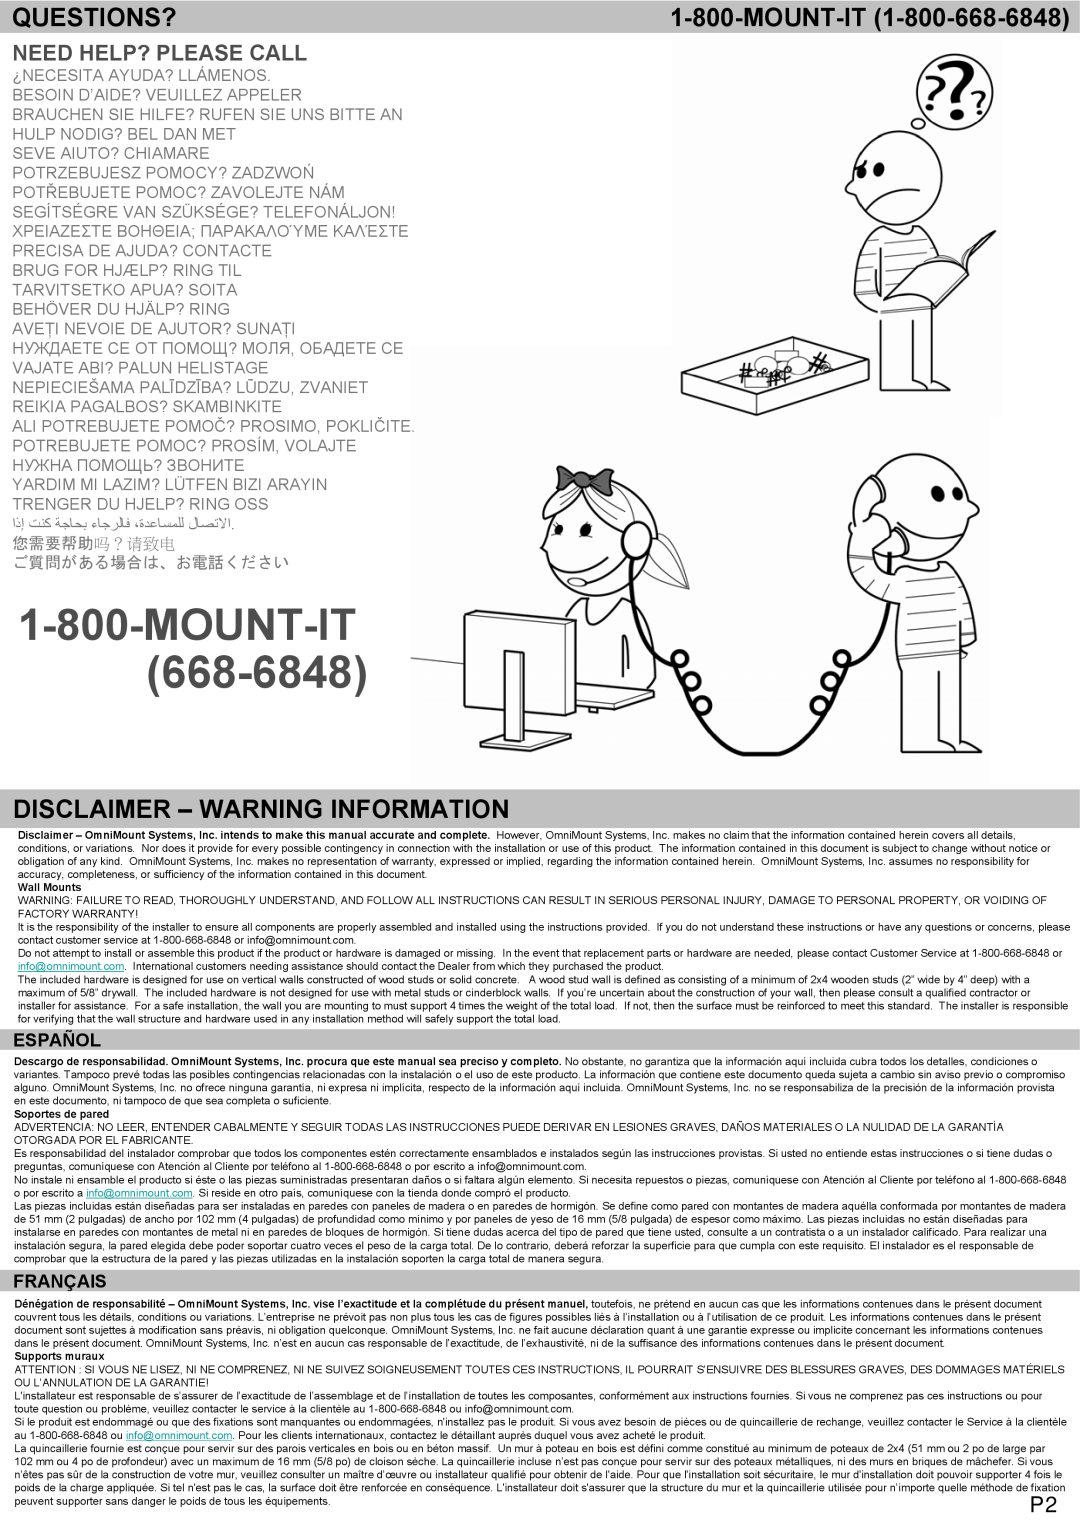 Omnimount LEDW120 manual Questions?, Disclaimer - Warning Information, Mount-It, Need Help? Please Call, Español, Français 